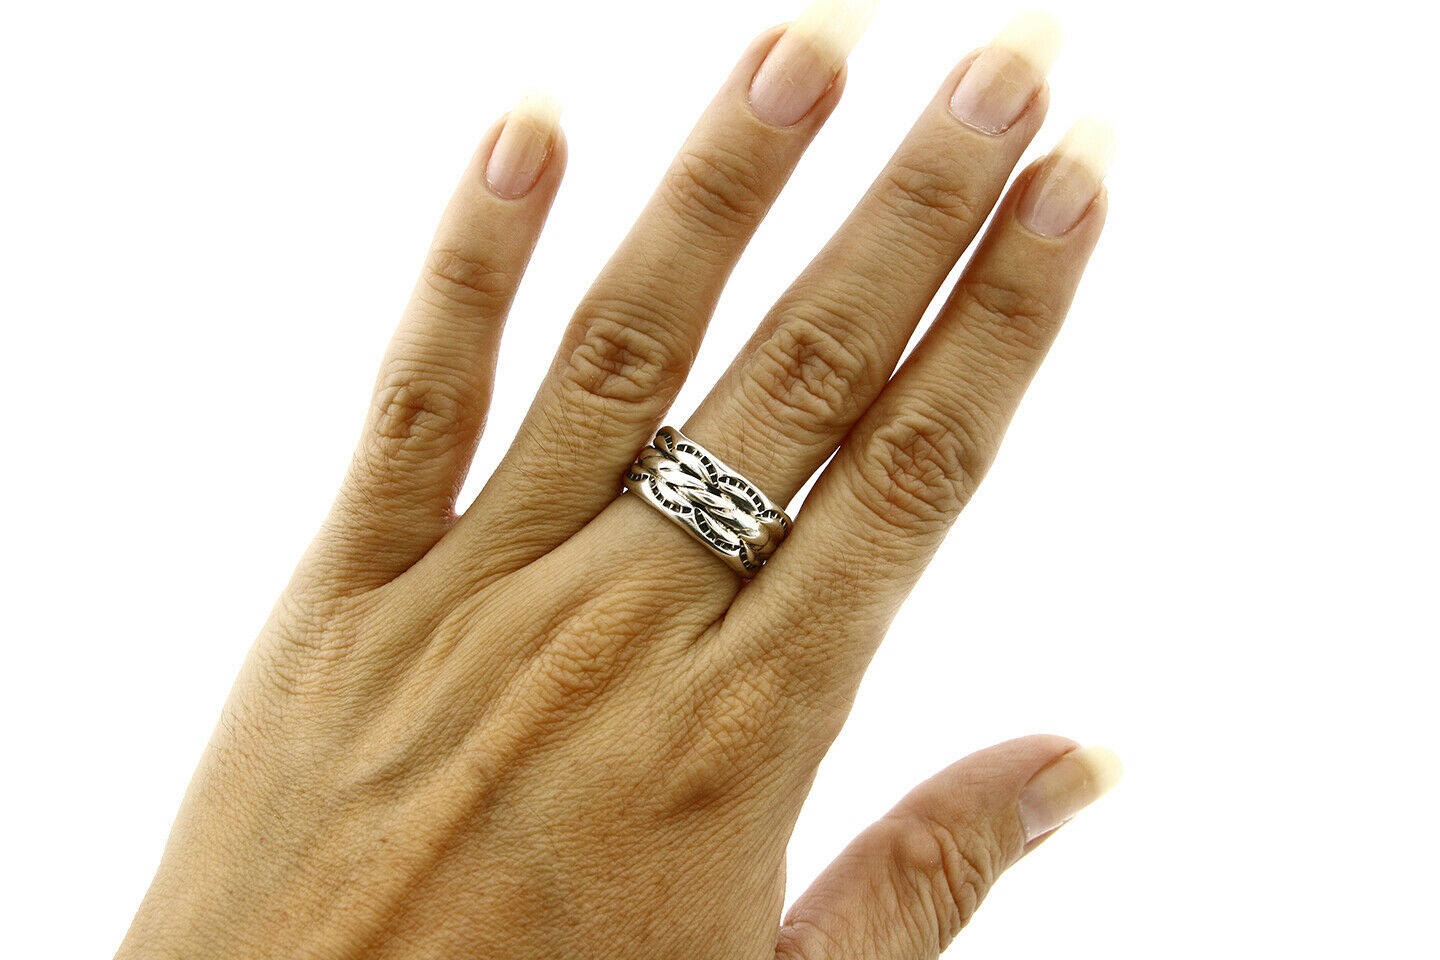 Navajo Ring .925 Silver Handmade Hand Stamped 3 Row Rope Band C.1980's Size 6.0